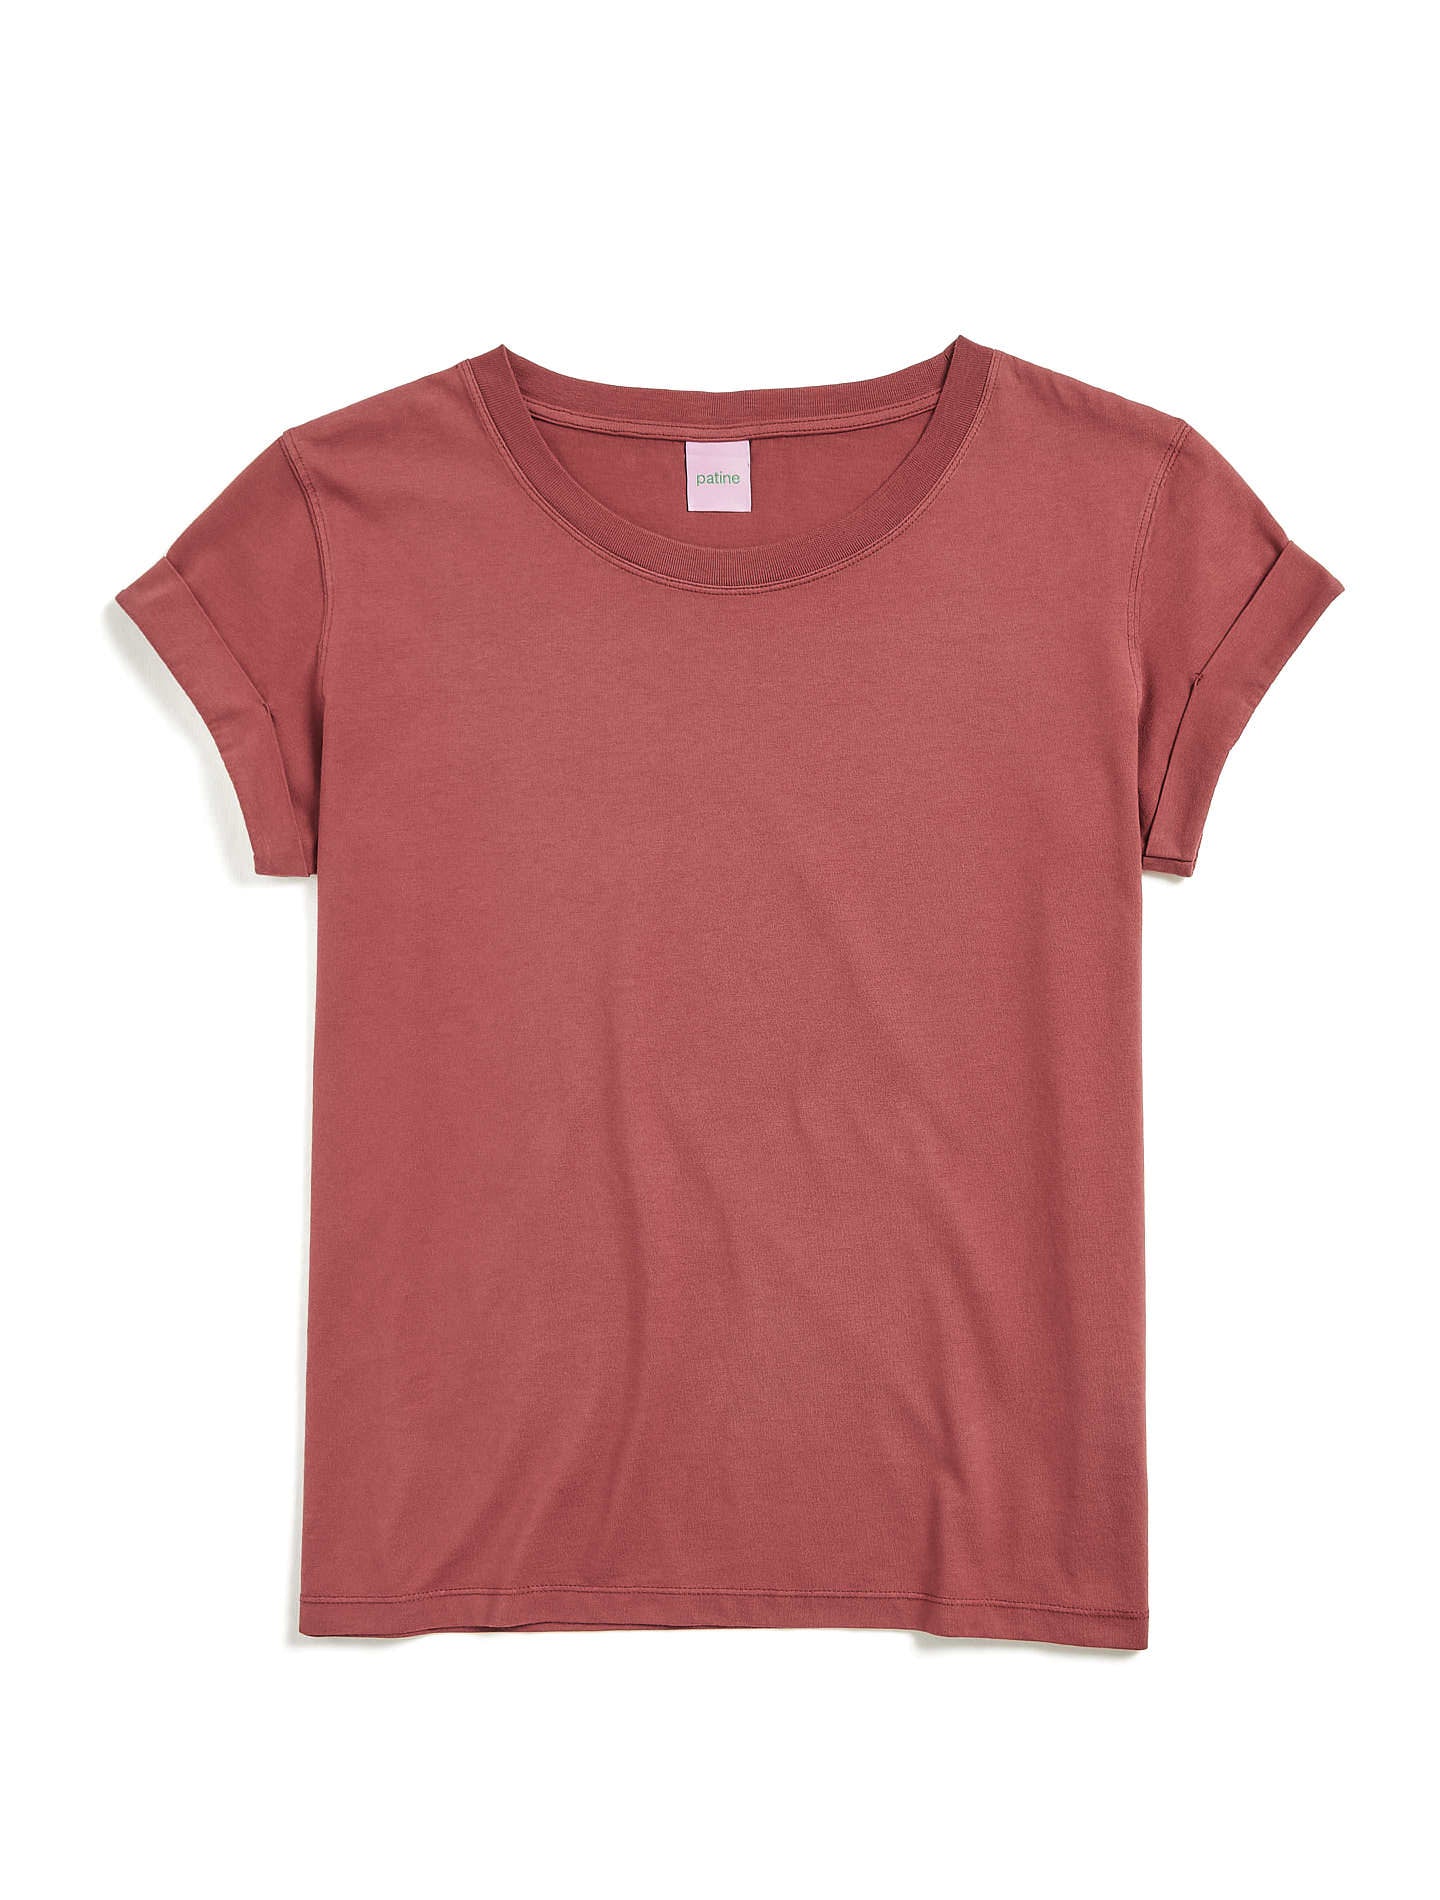 Le tee-shirt Cool Willie® jersey bio-recyclé Terracotta